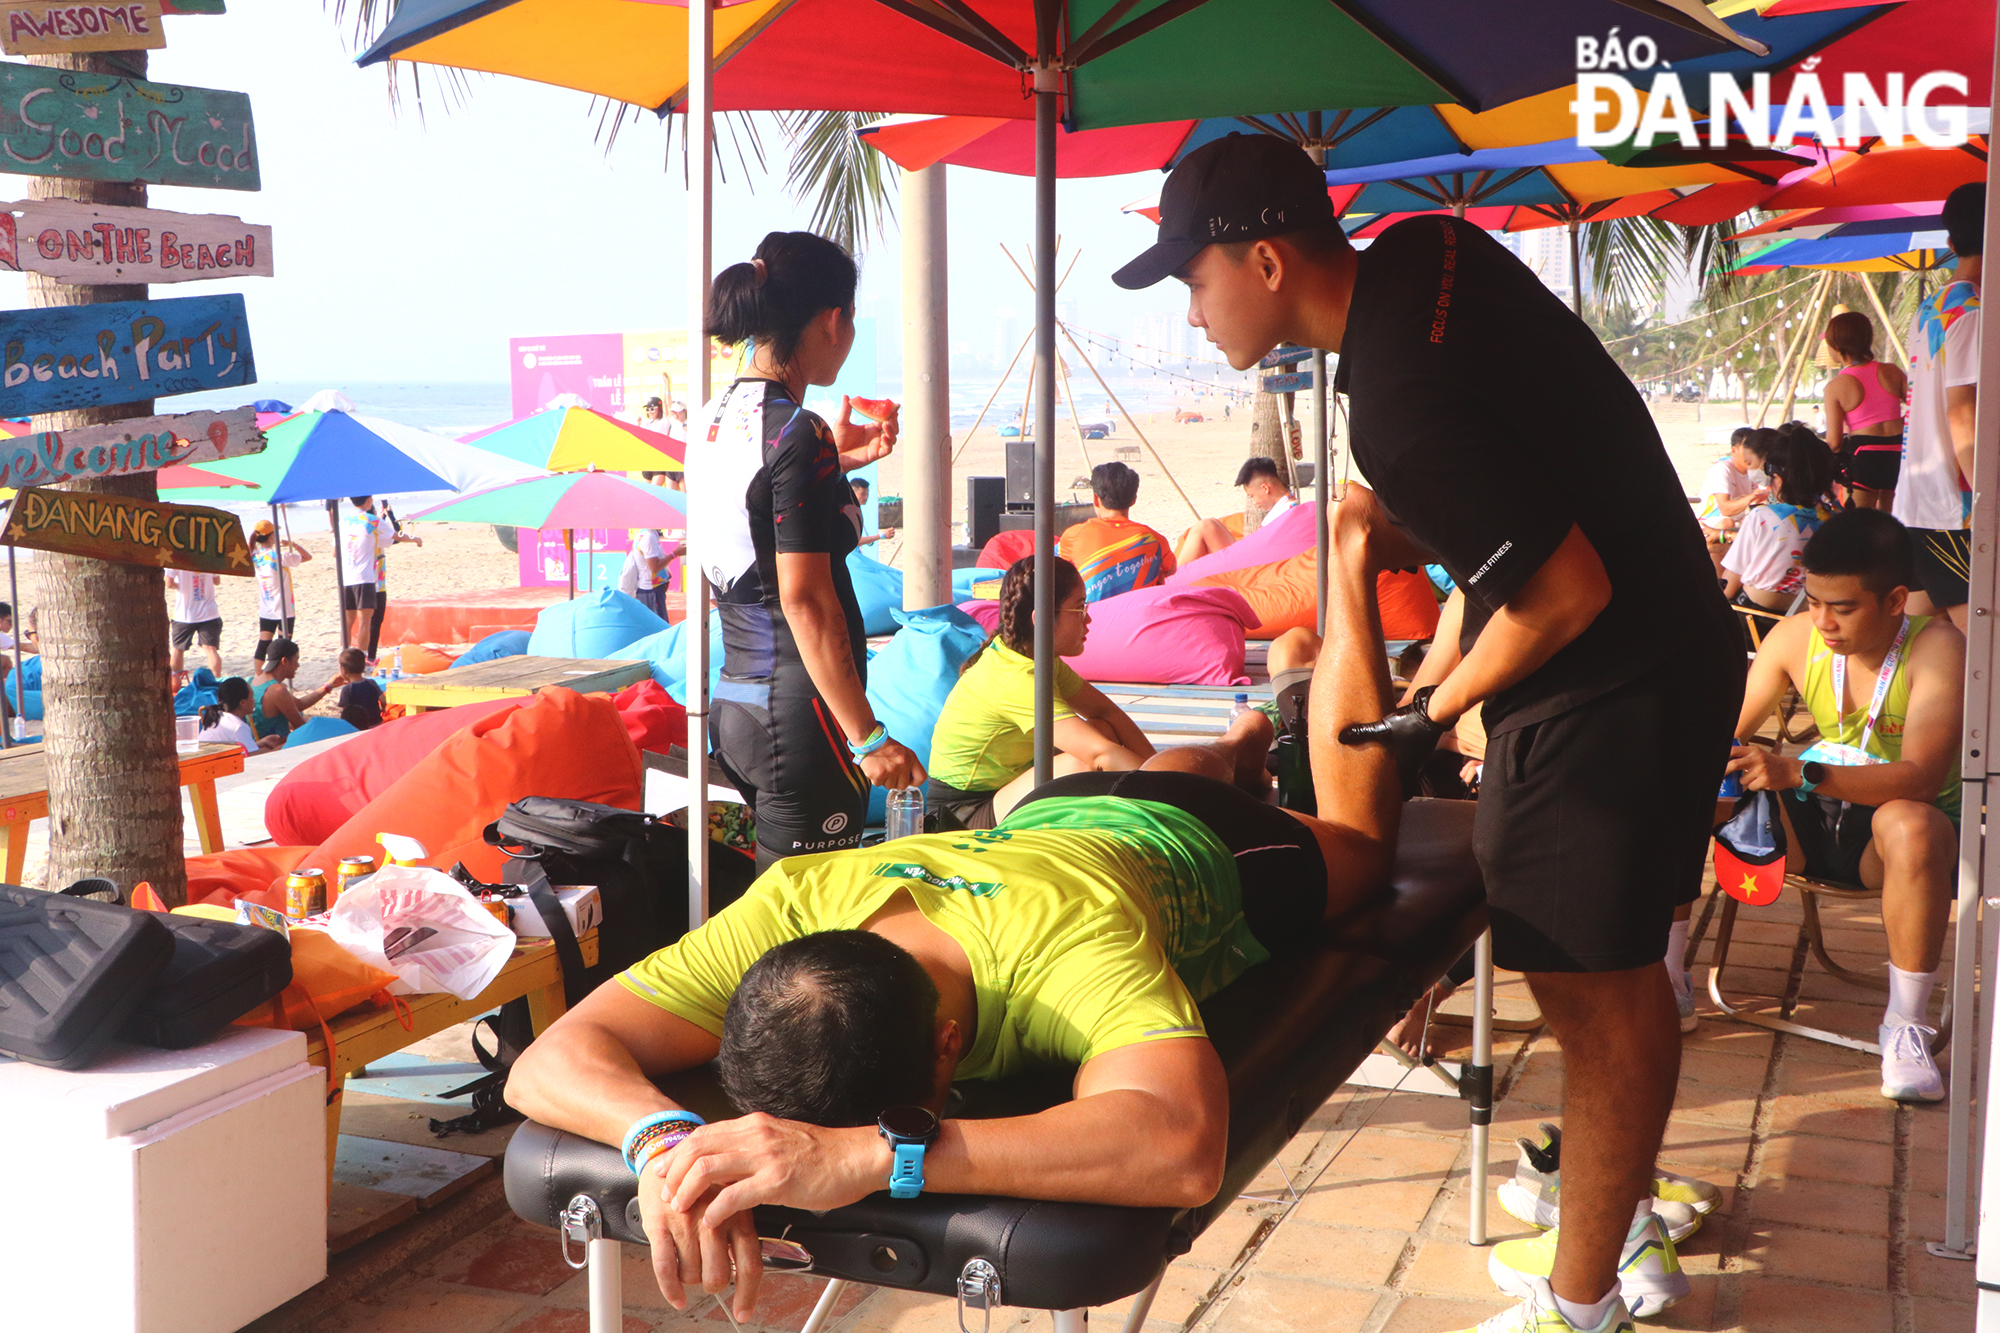  The event’s organisers support athletes to make recovery after participating in the competition.